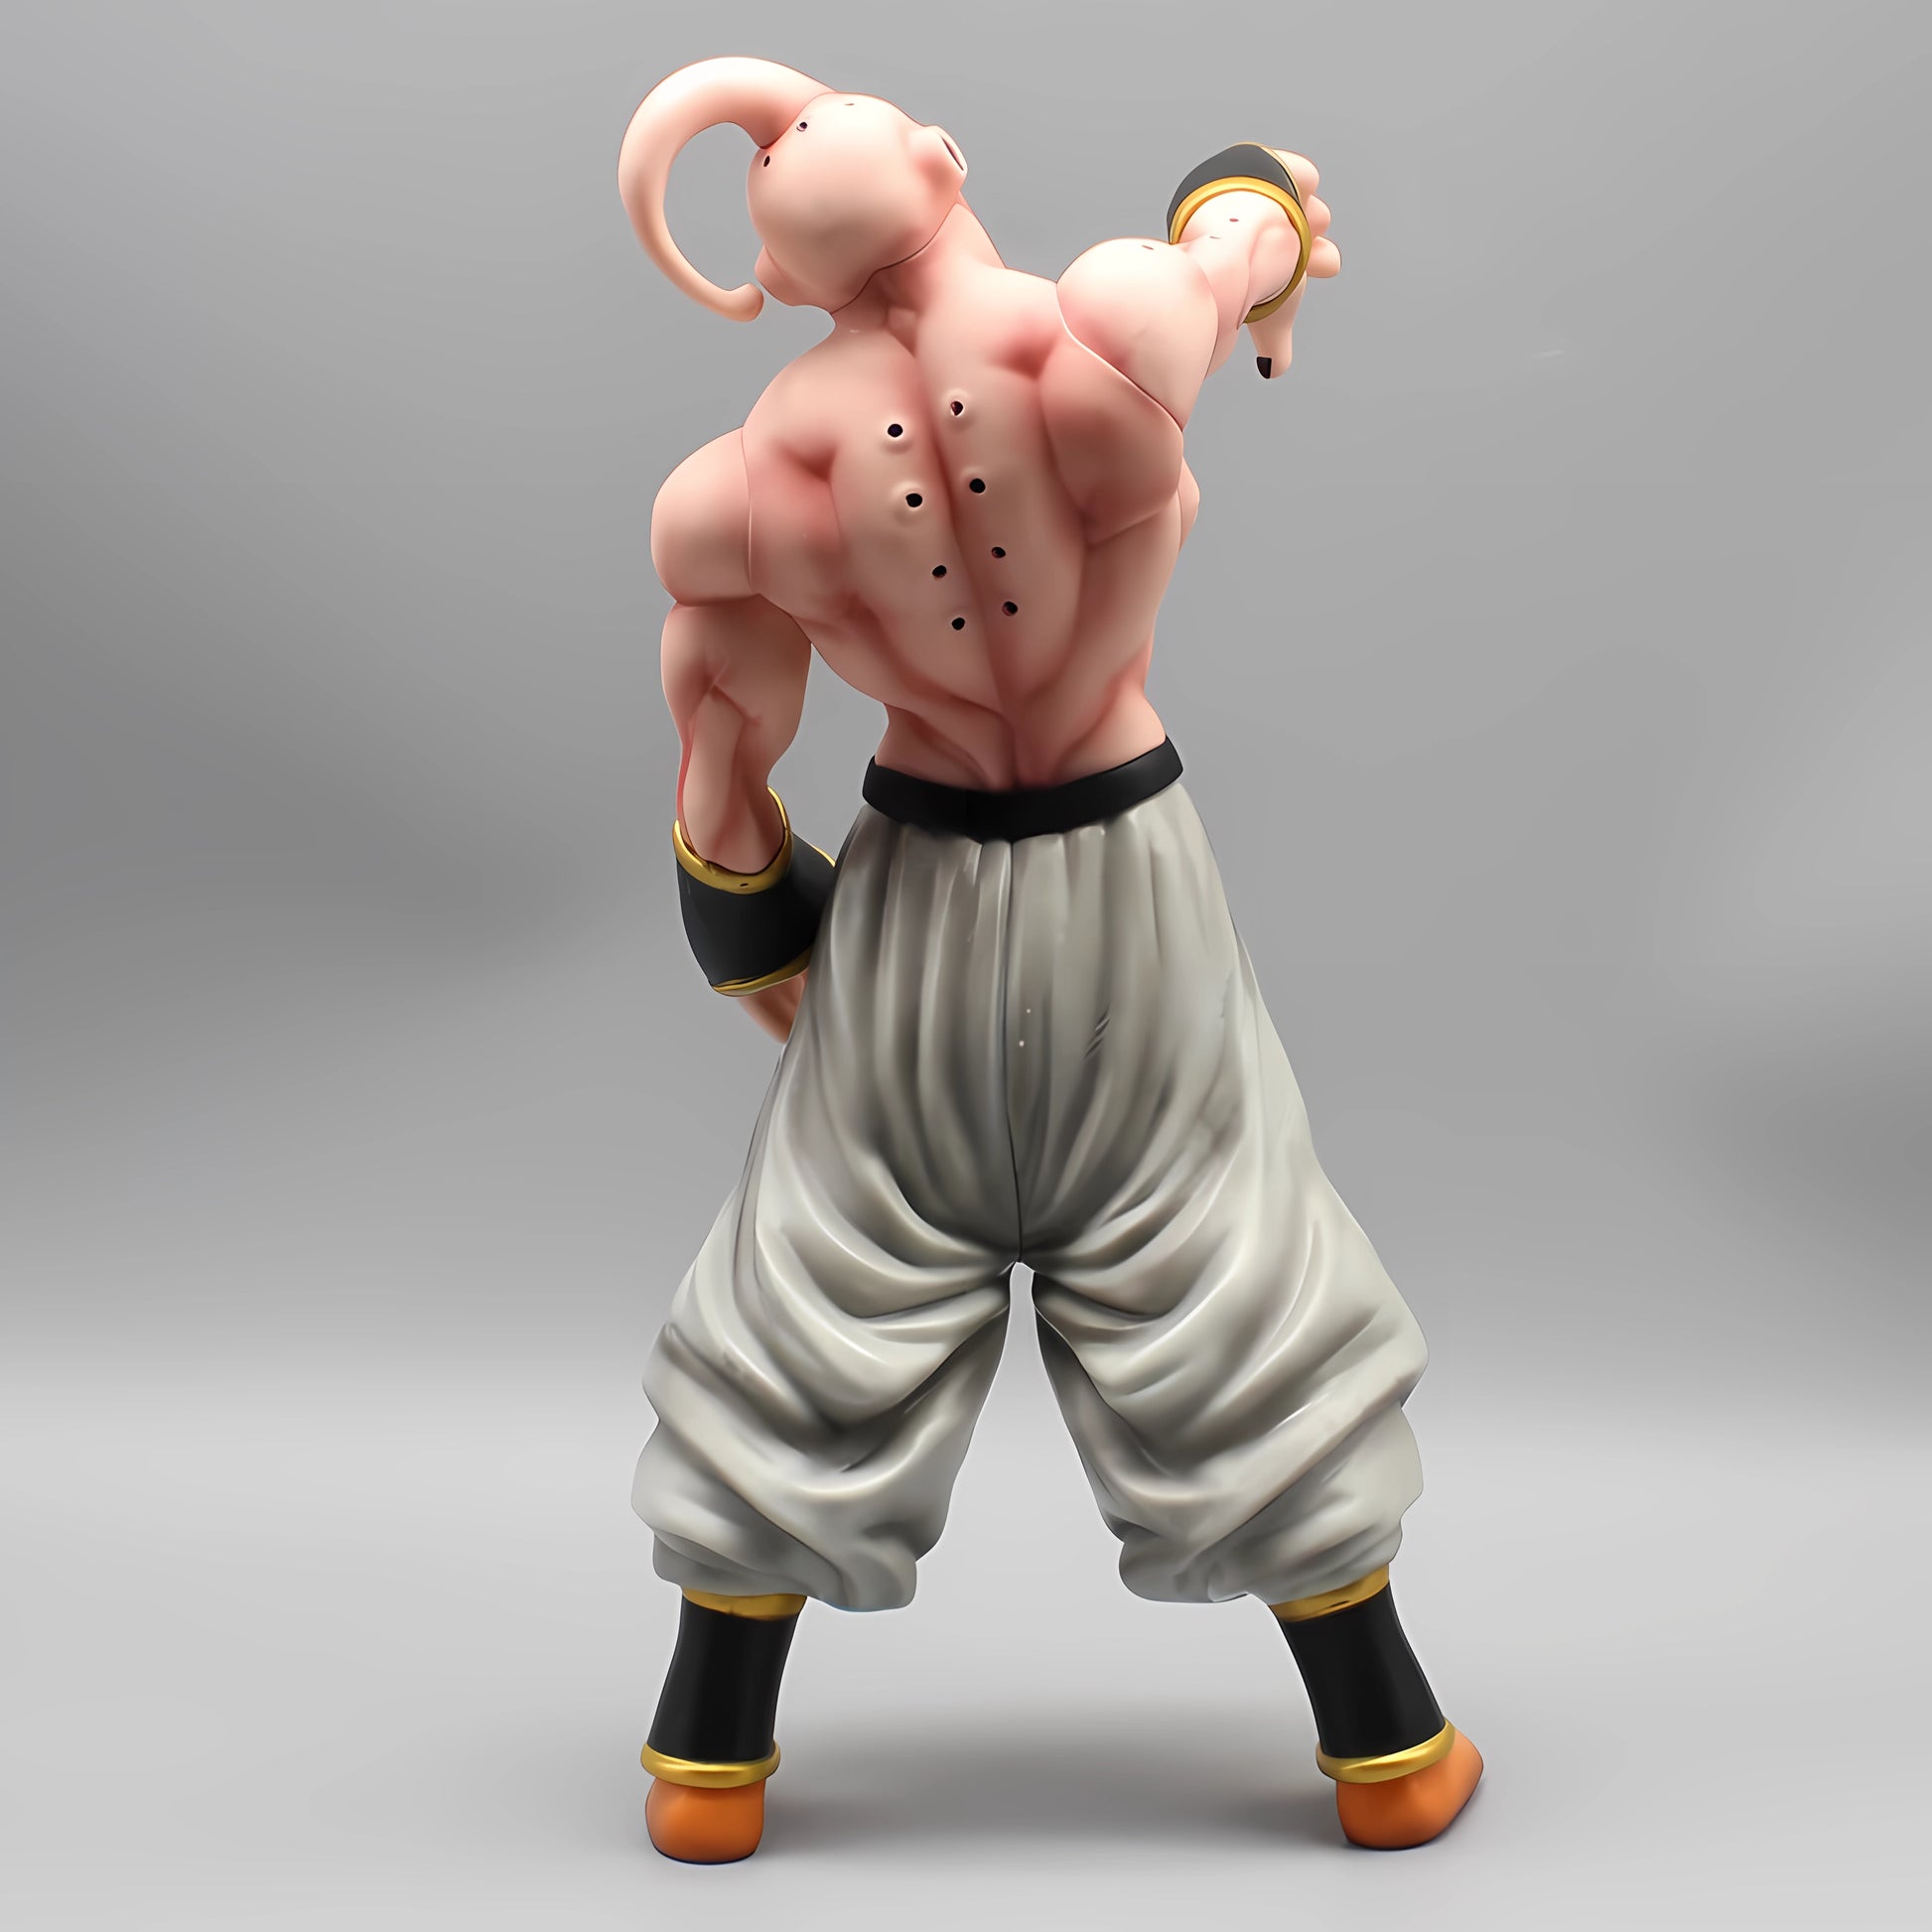 Rear view of the 'Malevolent Majin Buu' collectible, capturing the back muscles and pants' drapery, reflecting the character's strength and design details.